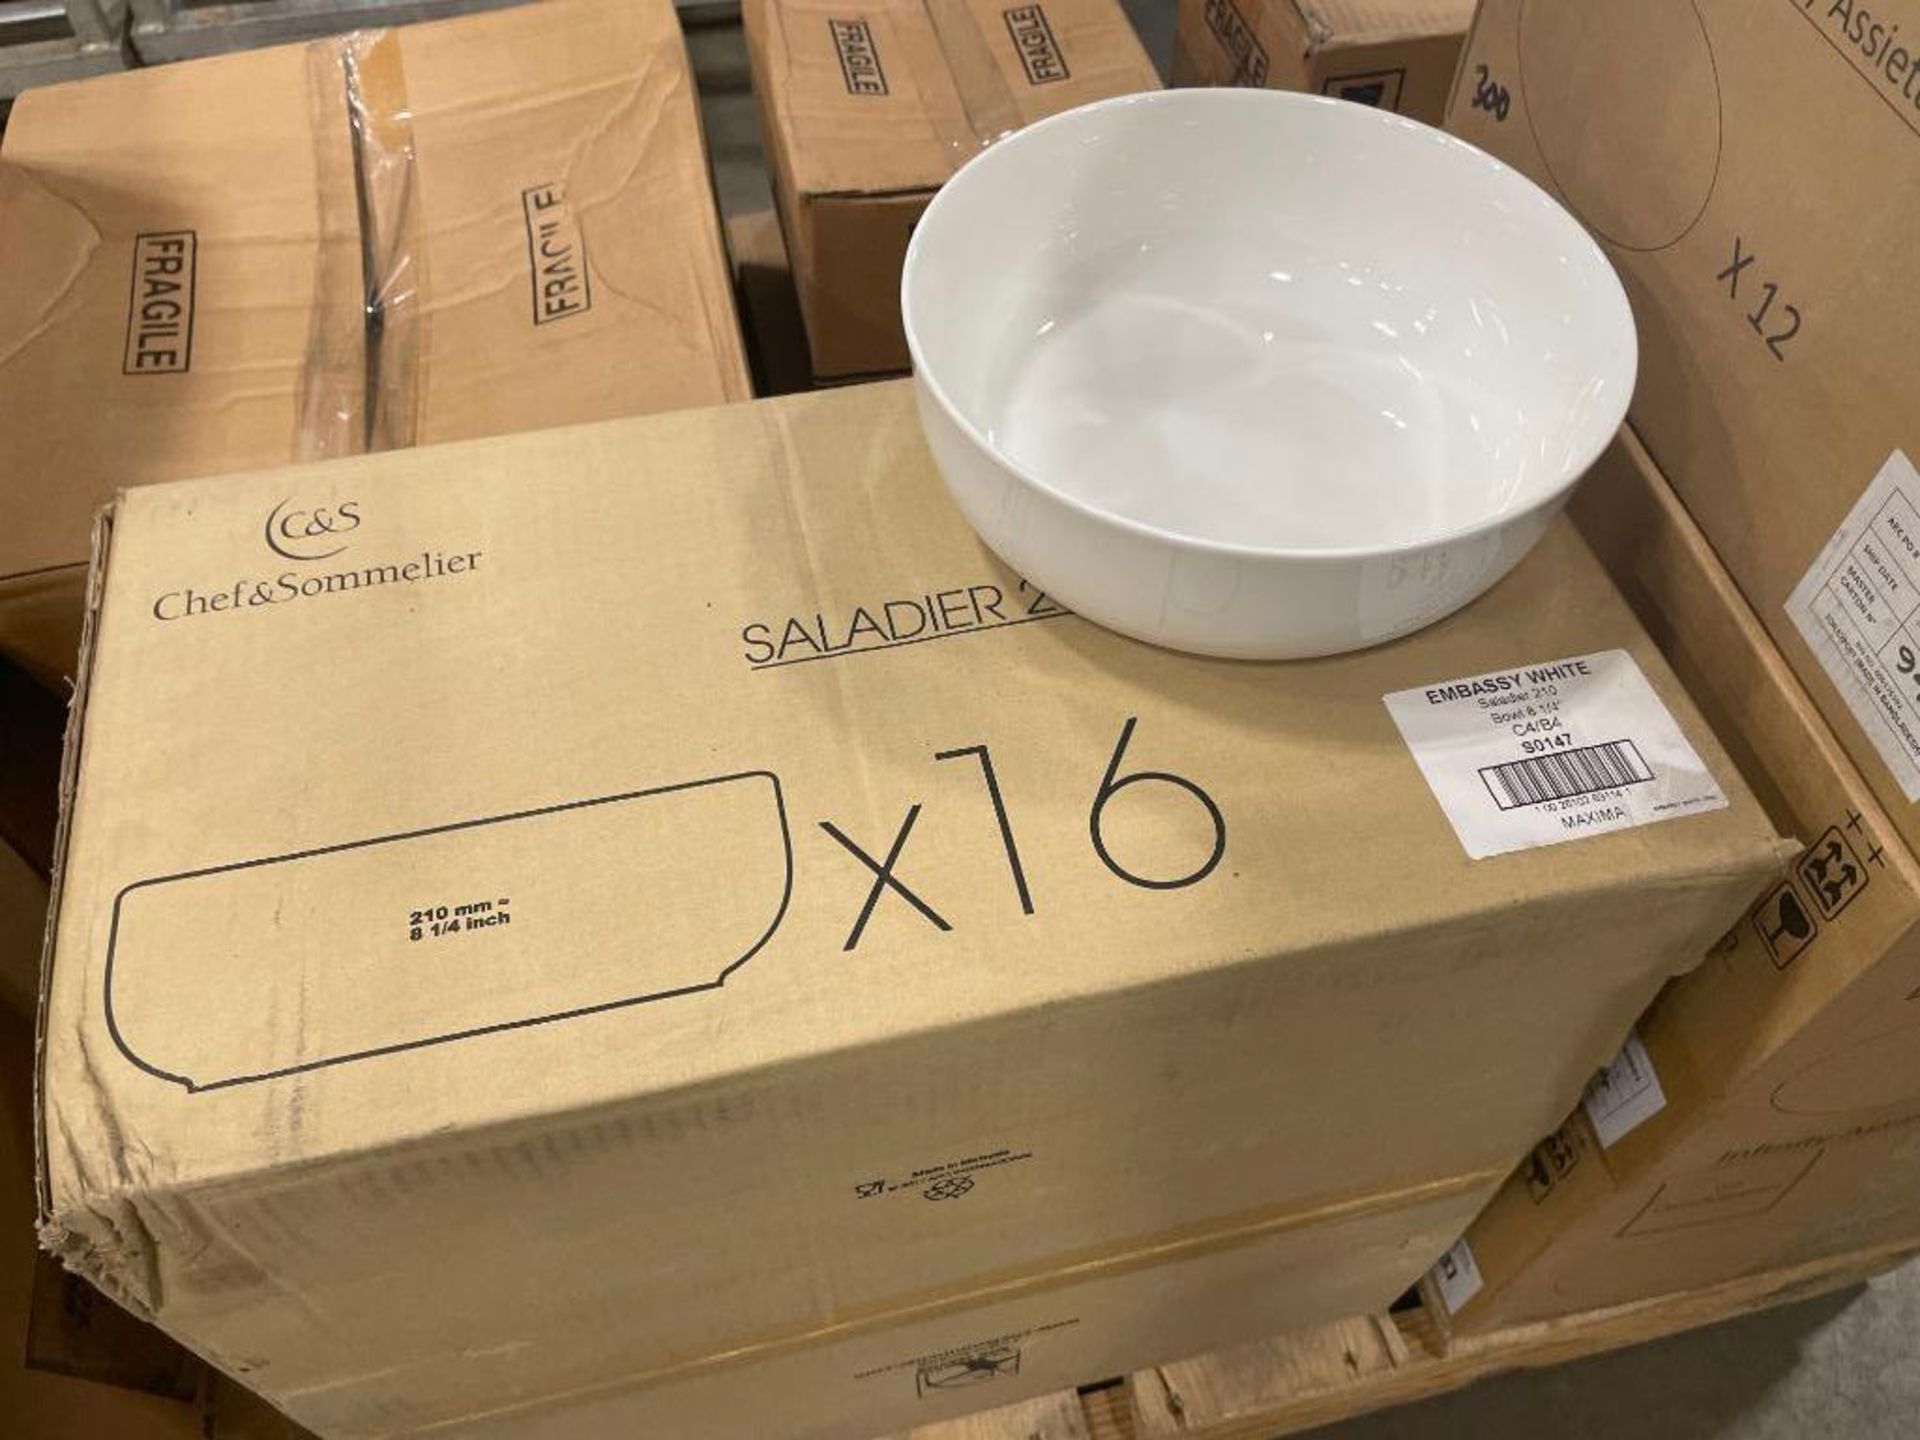 2 CASES OF 60OZ/1800ML WHITE PORCELAIN BOWLS, ARCOROC "EMBASSY" S0147 - LOT OF 32 - NEW - Image 6 of 6